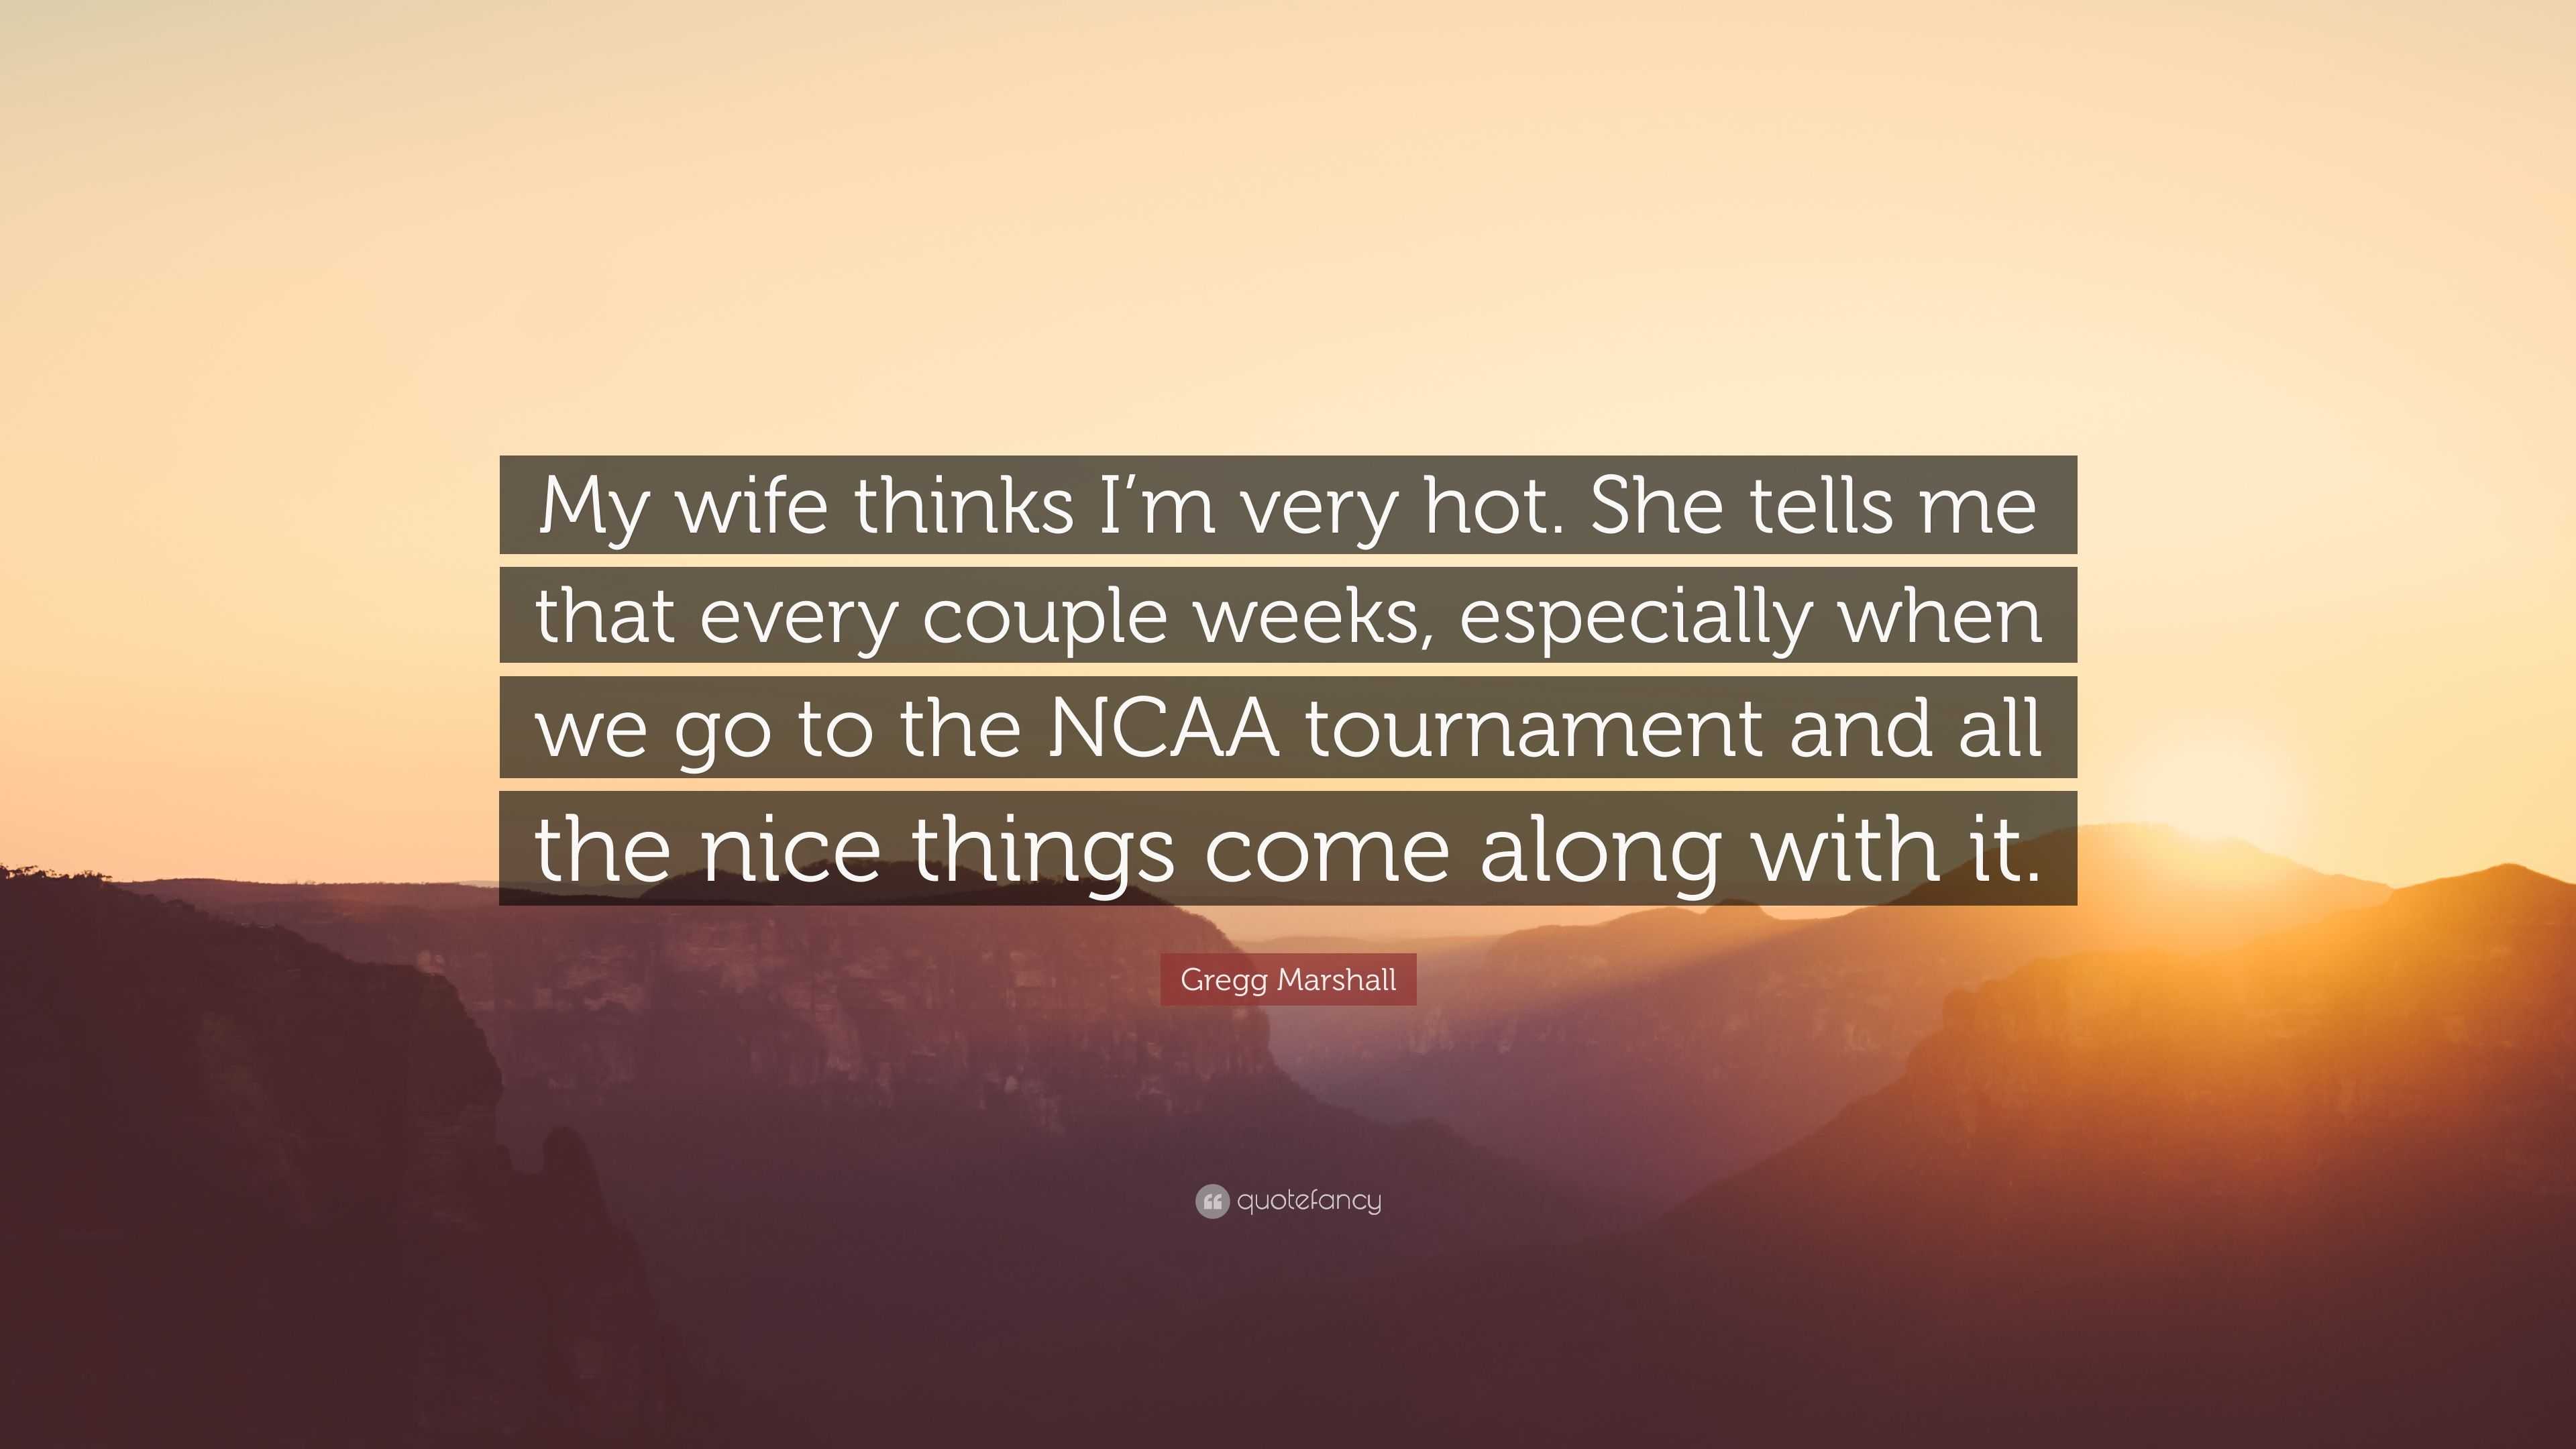 daniel mcduffee recommends hot wife quotes pic